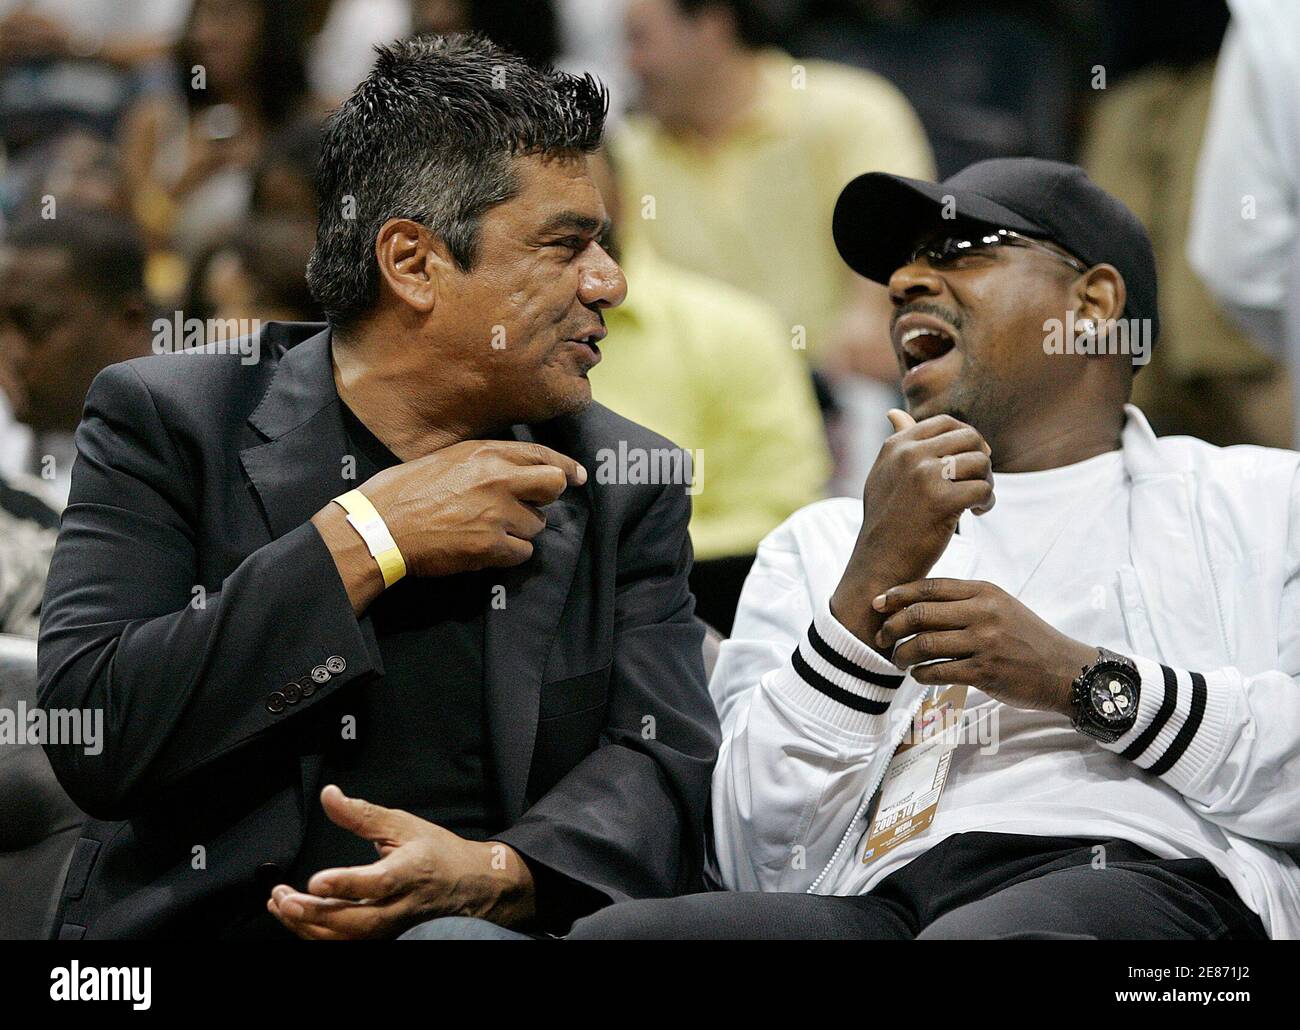 Comedians George Lopez (L) and Martin Lawrence chat during Game 5 of their  NBA Eastern Conference basketball playoff series between the Atlanta Hawks  and the Milwaukee Bucks in Atlanta, Georgia, April 28,